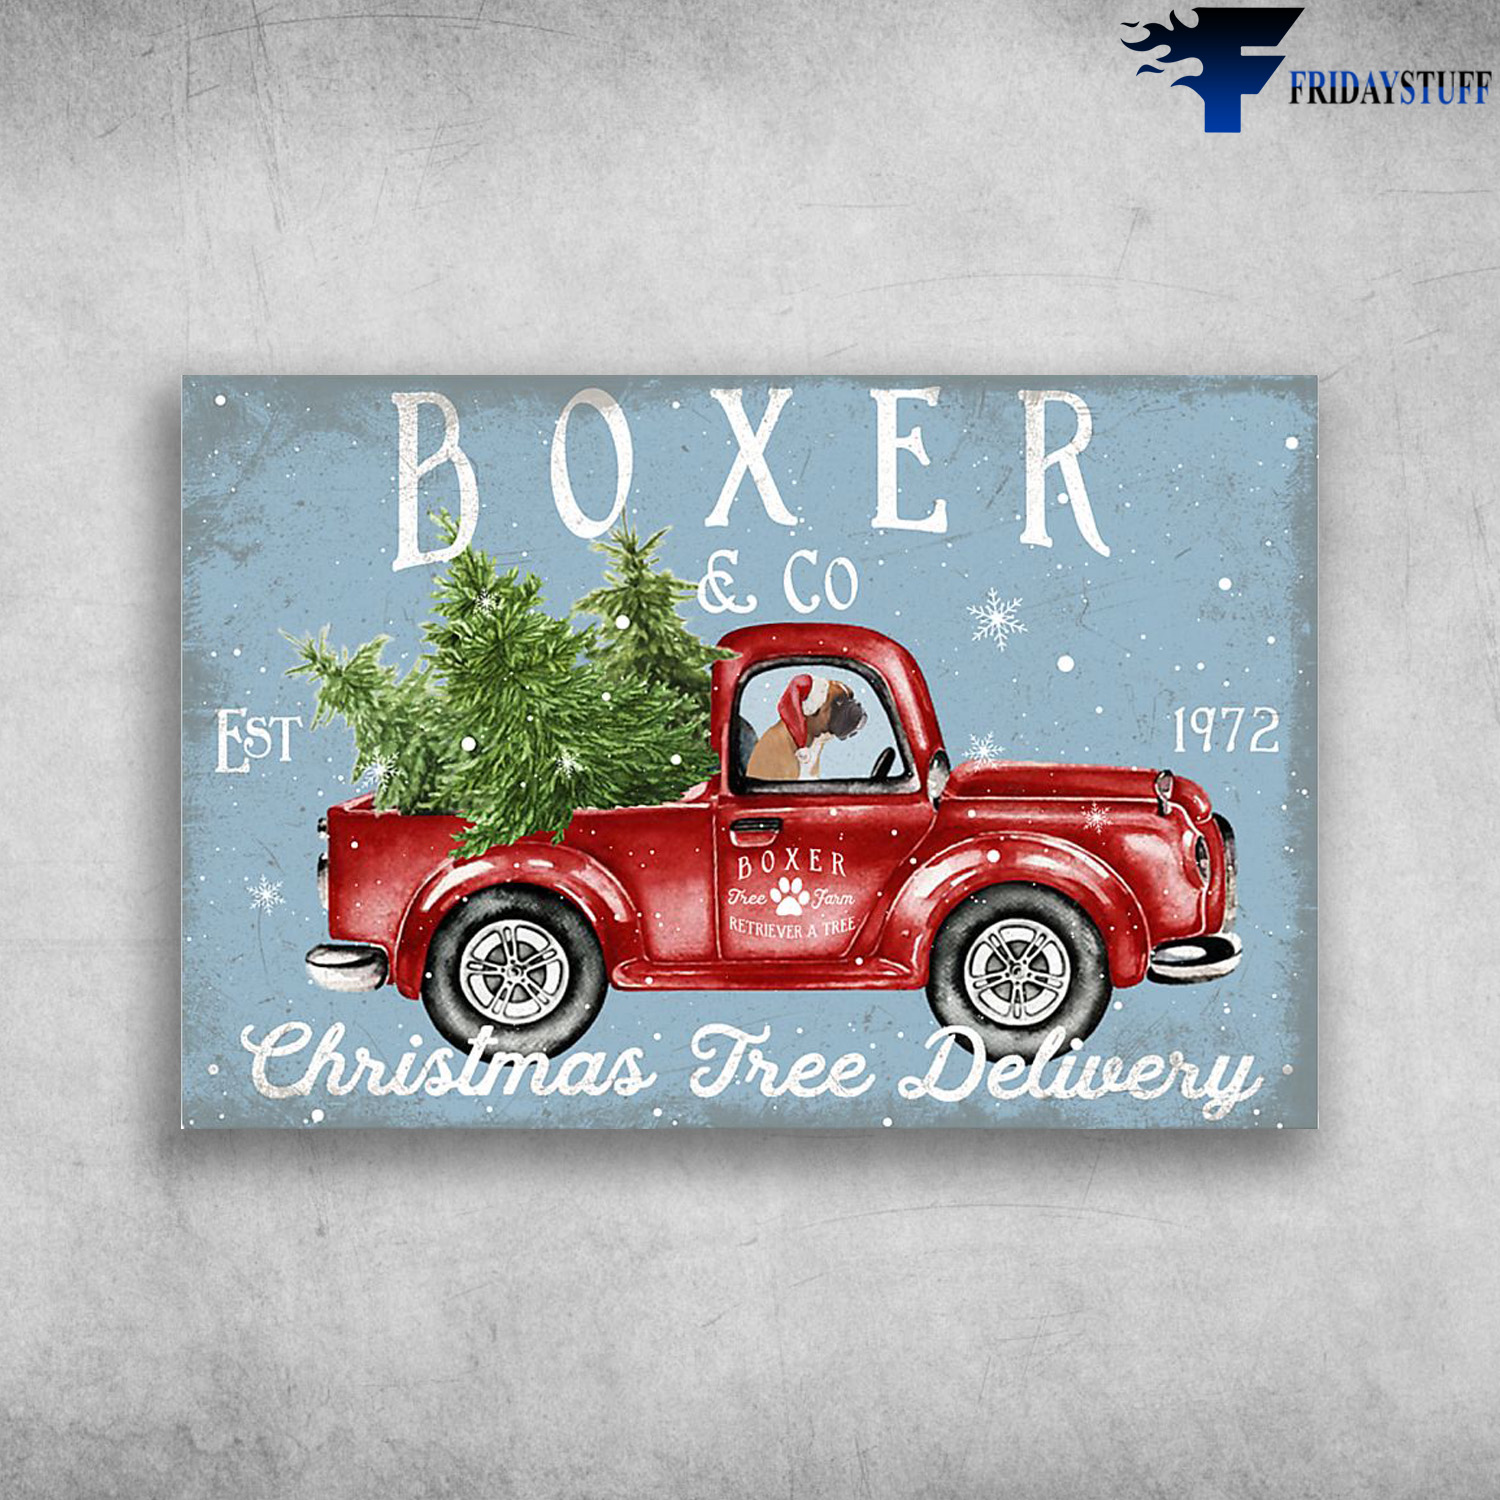 Boxer In Truck - Boxer & Co Est 1972, Christmas Free Delivery